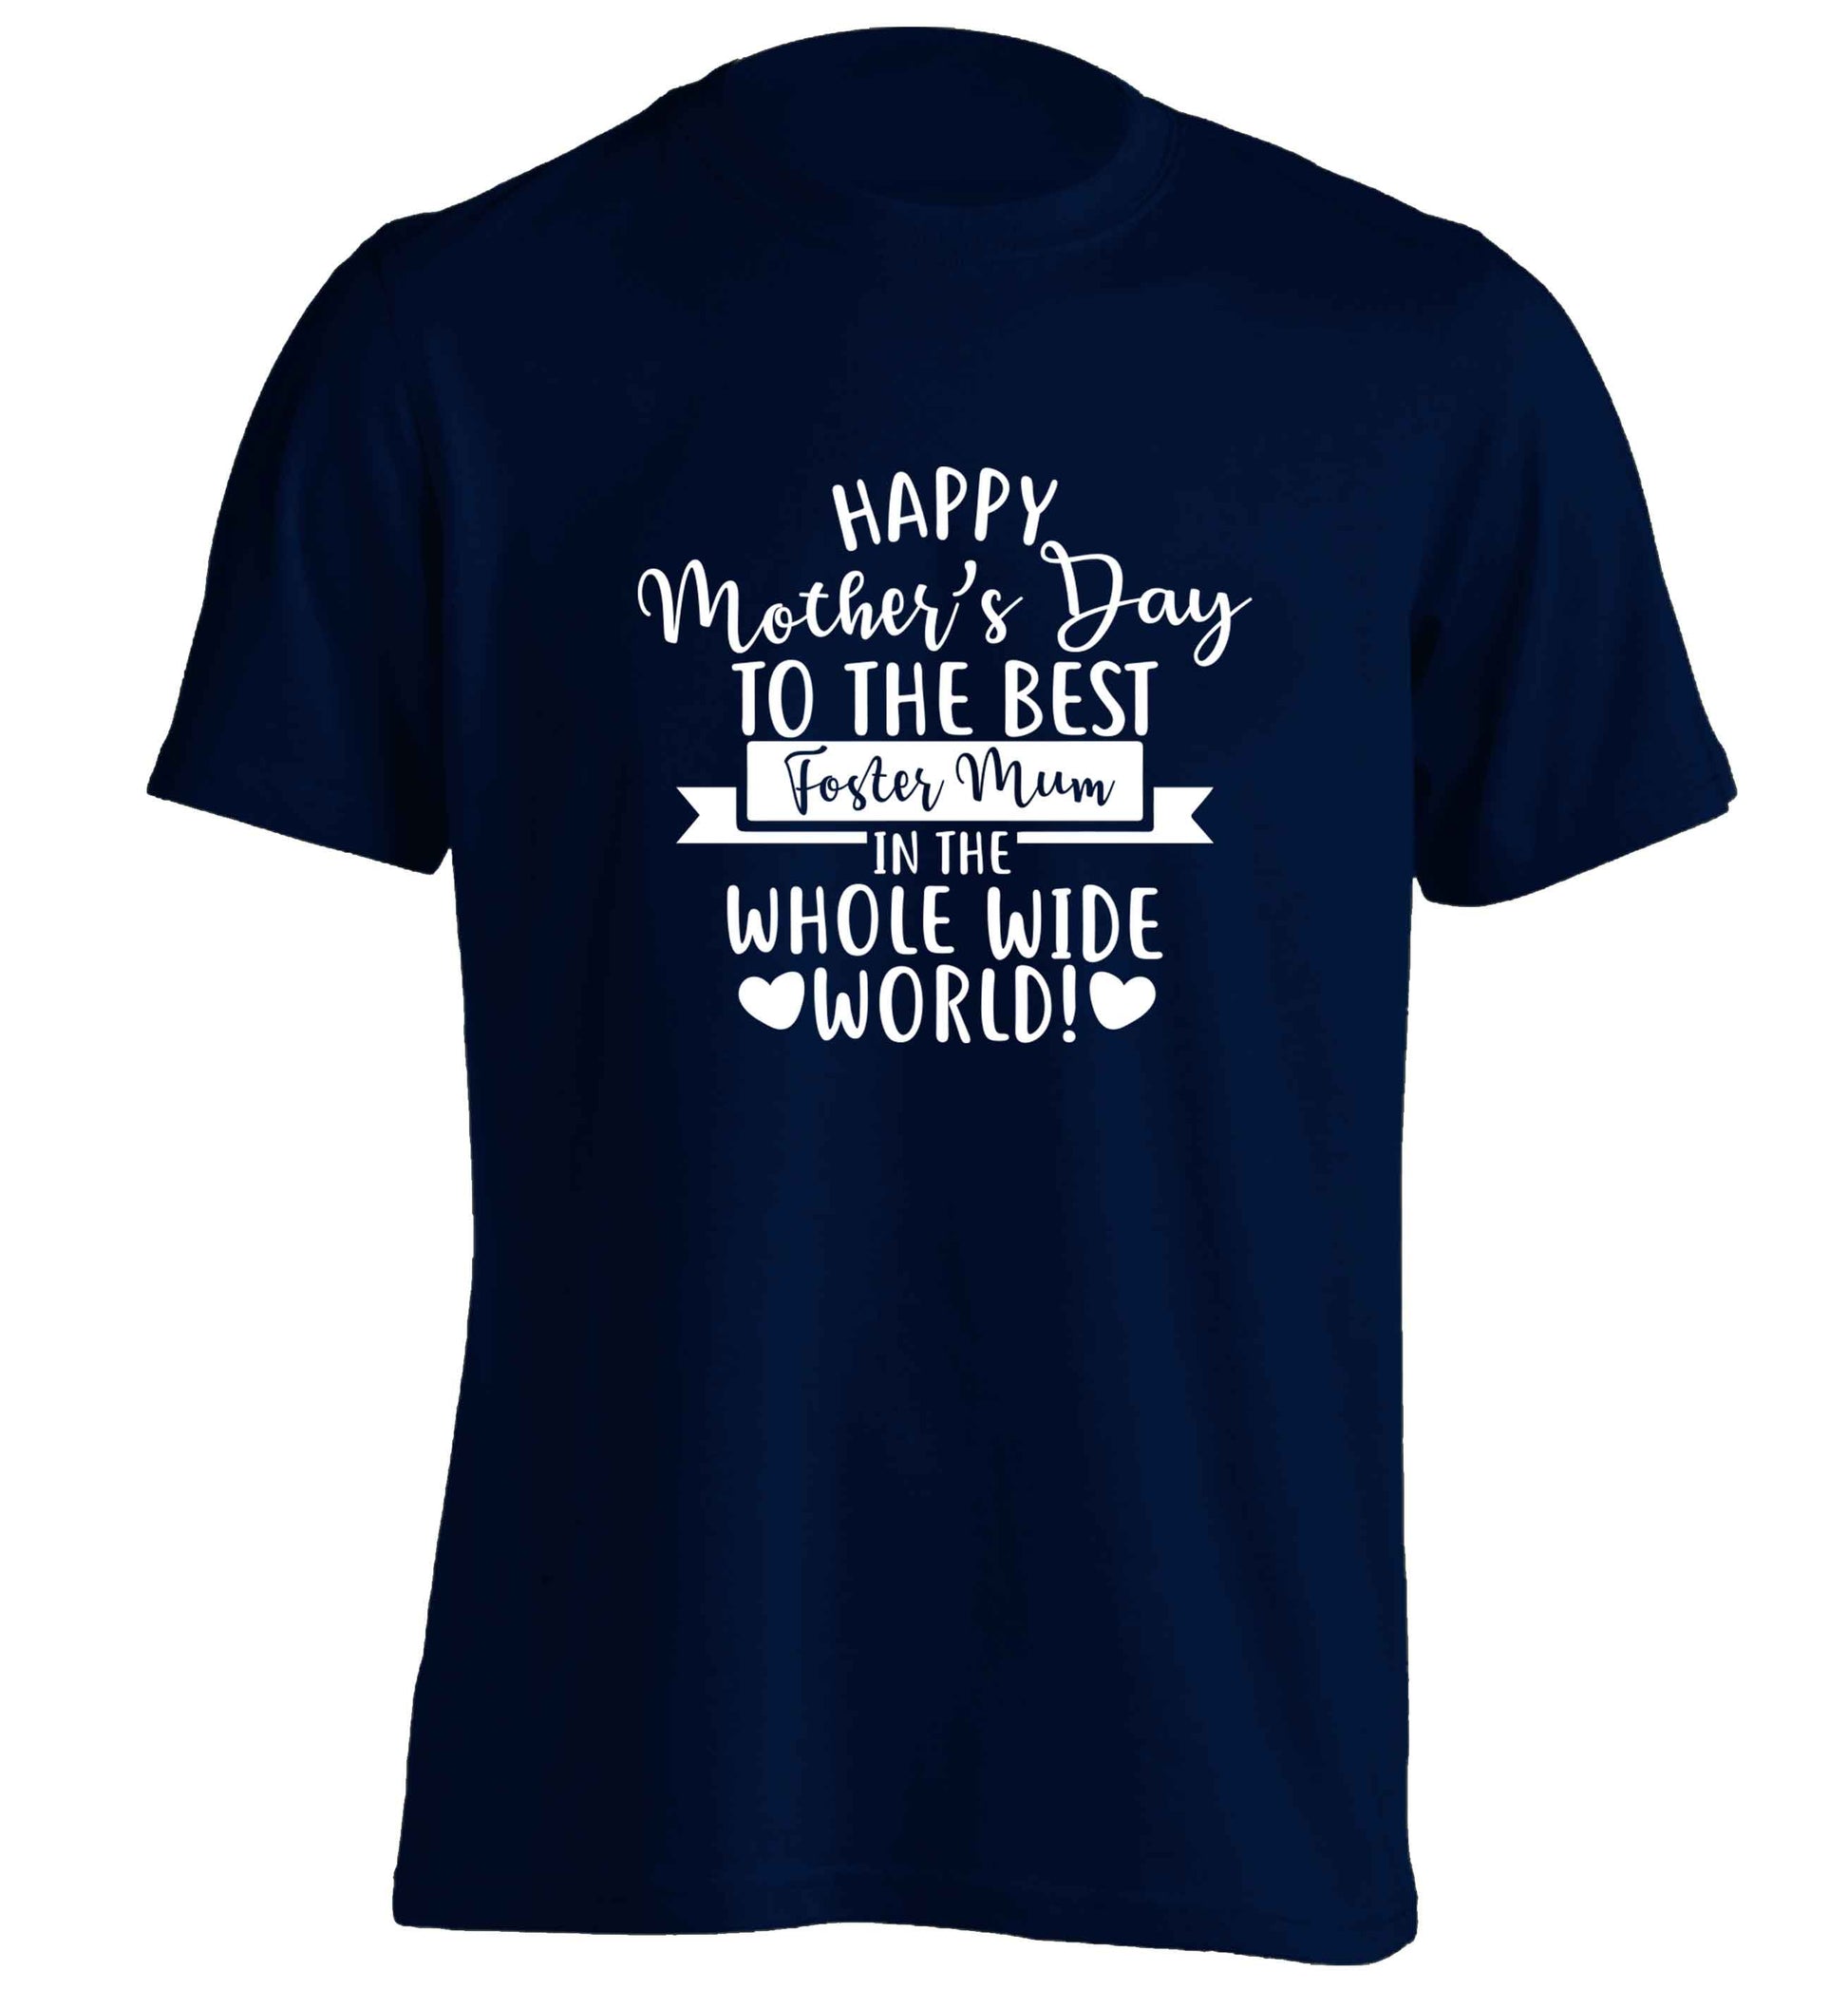 Happy mother's day to the best foster mum in the world adults unisex navy Tshirt 2XL